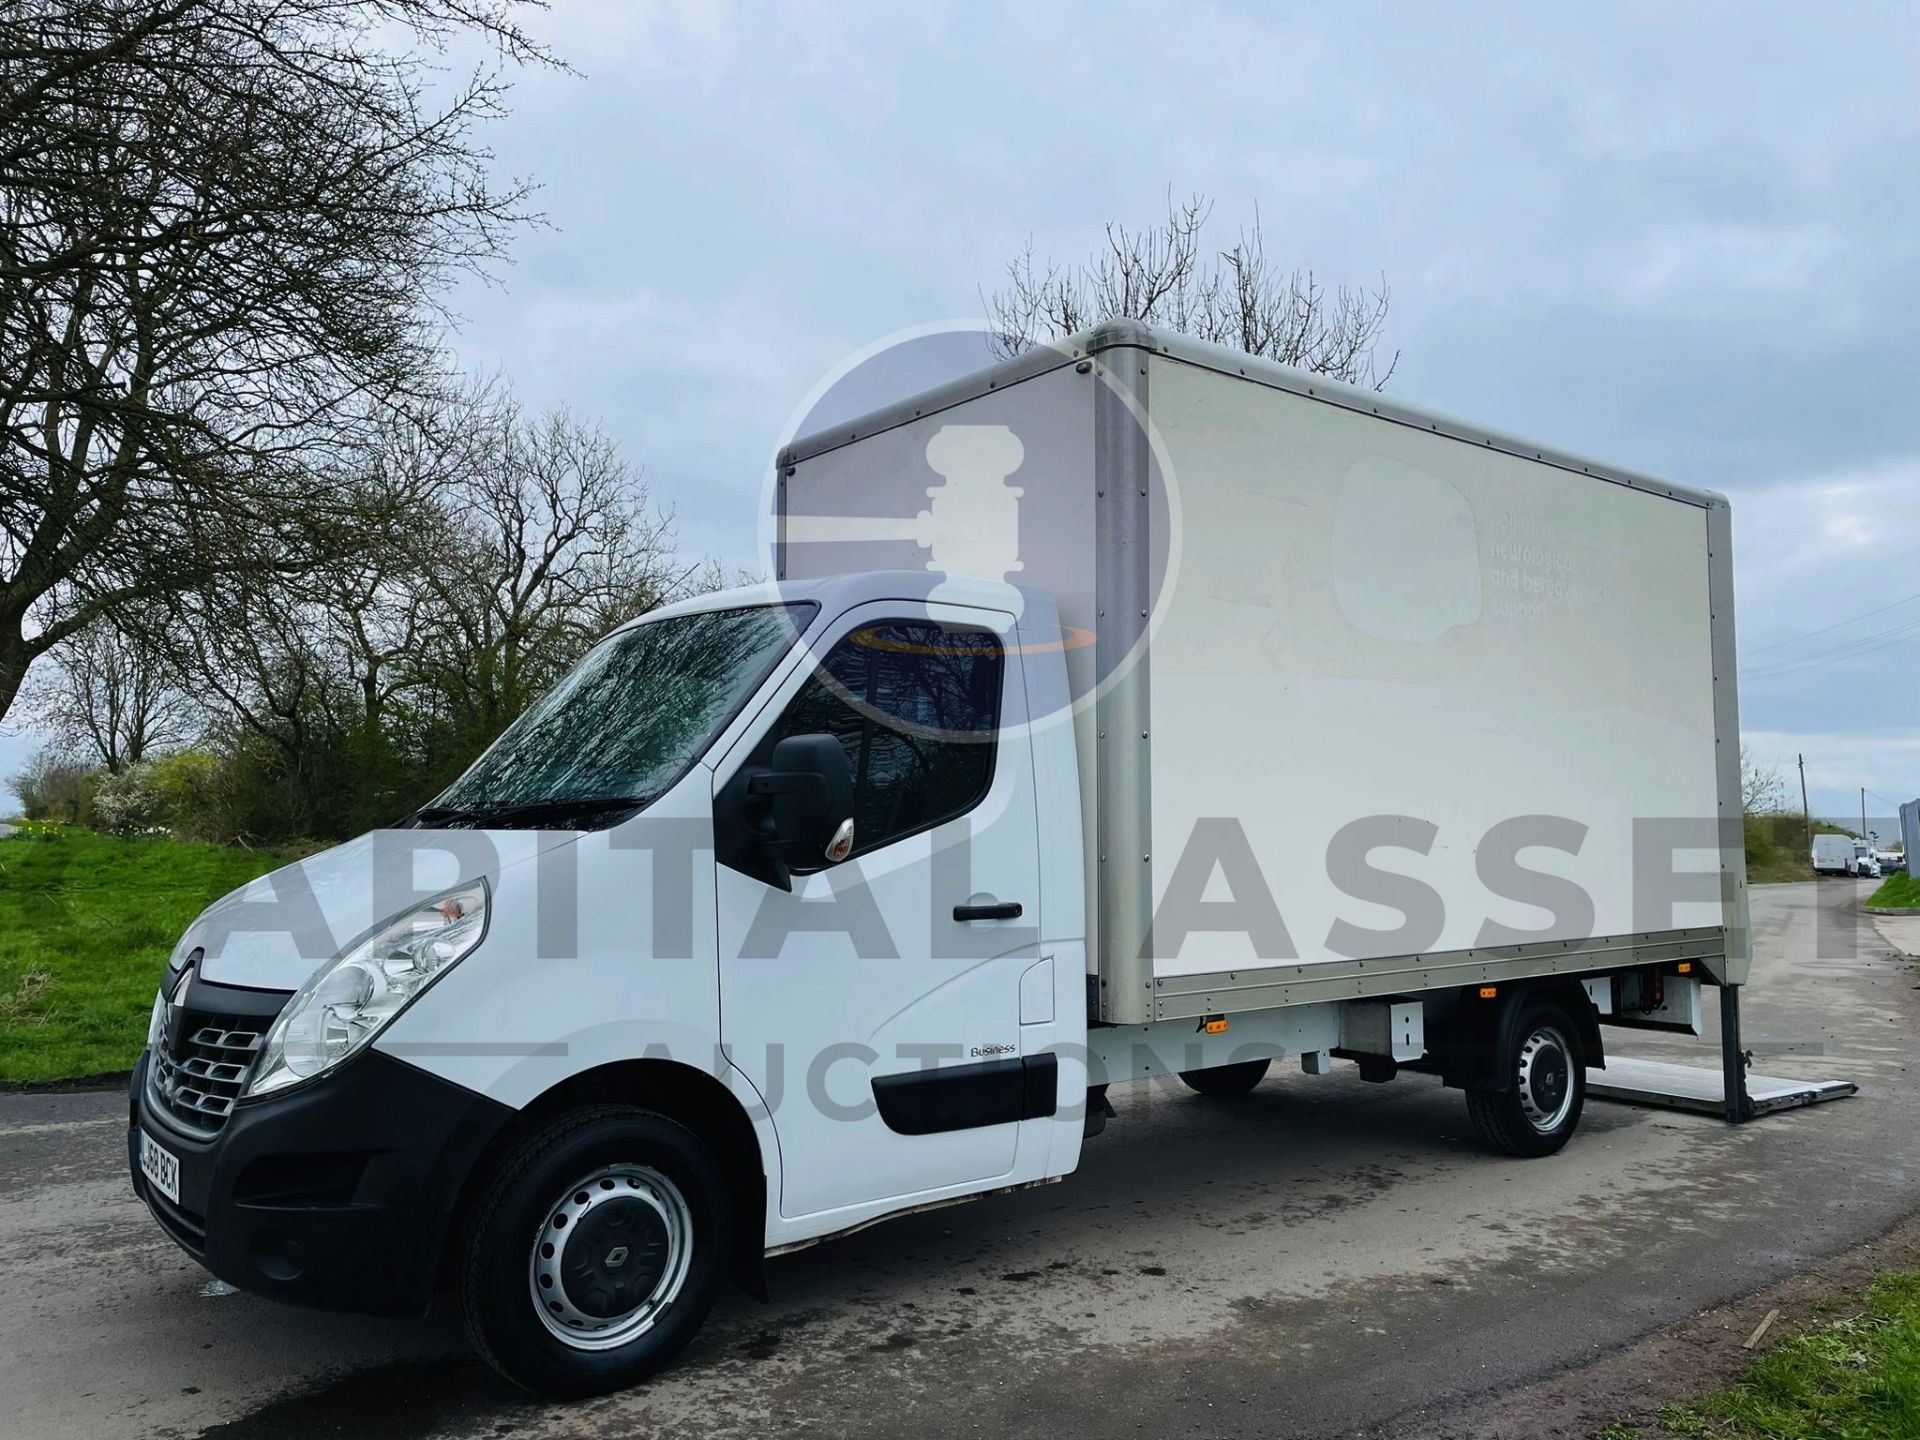 RENAULT MASTER 2.3 DCI 130 BUSINESS EDITION LWB (LUTON / BOX VAN) - 2019 MODEL - EURO 6 - TAIL LIFT! - Image 4 of 19